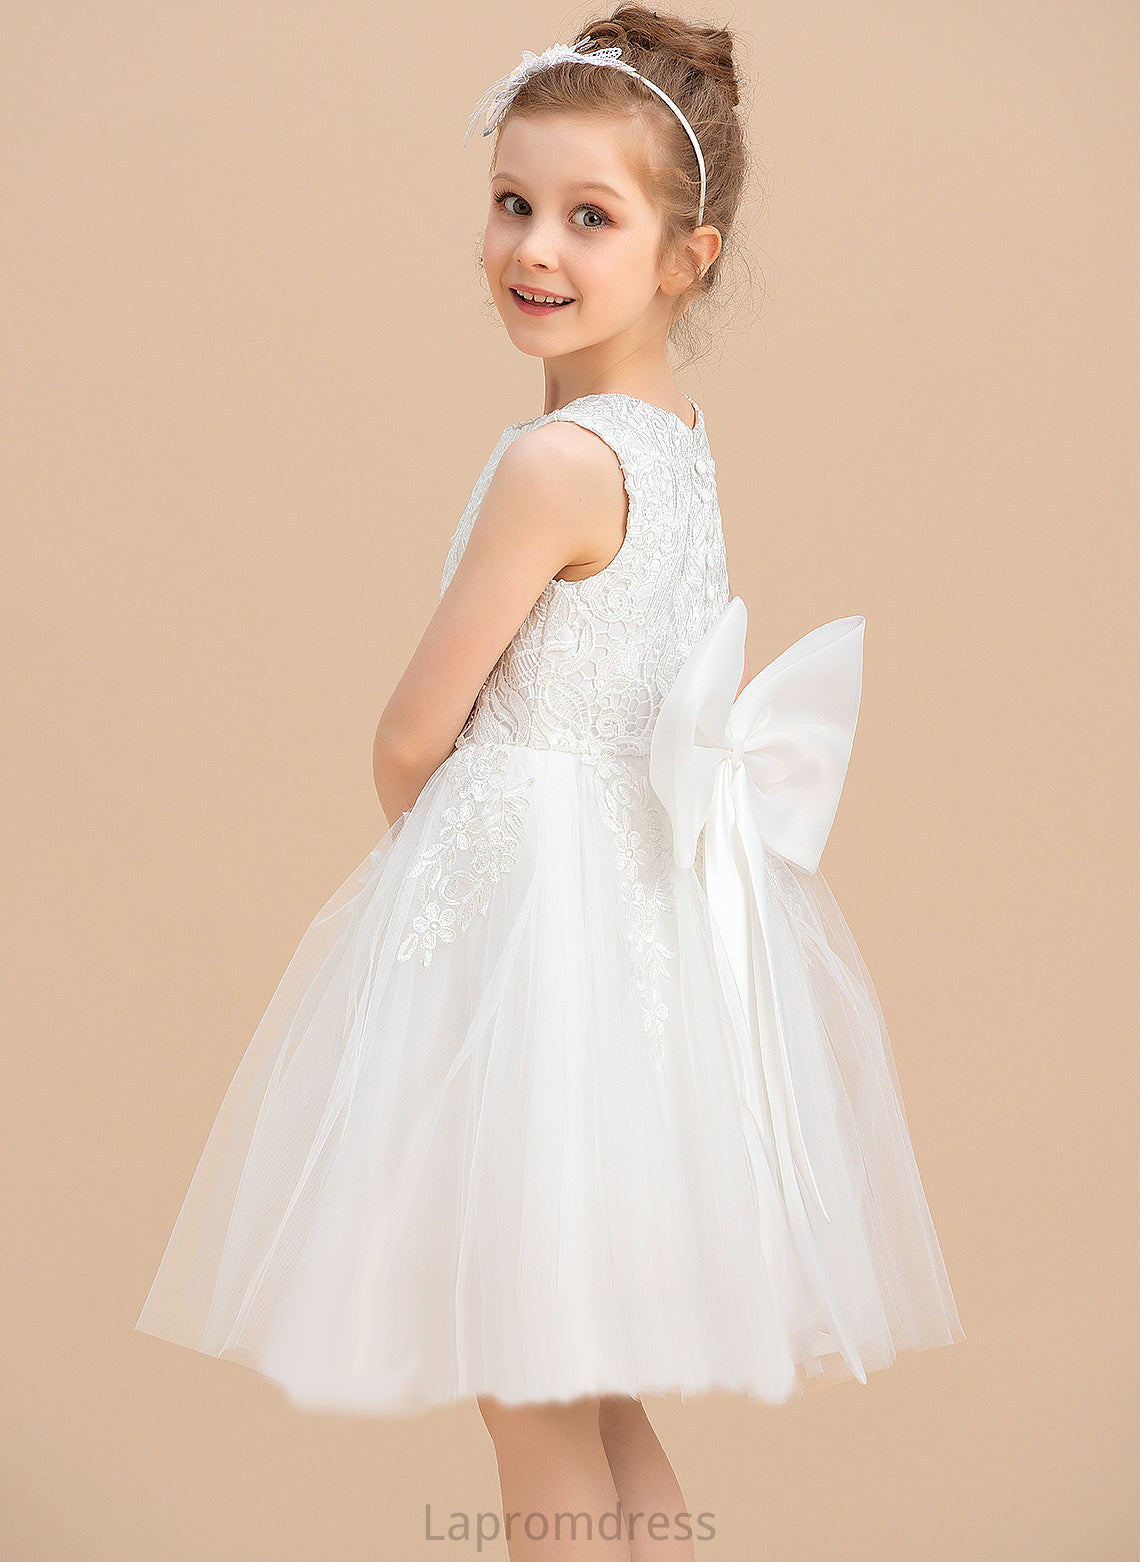 Girl Sleeveless Scoop Lucile Neck Tulle/Lace Lace/Bow(s) Flower Knee-length Dress Flower Girl Dresses - A-Line With